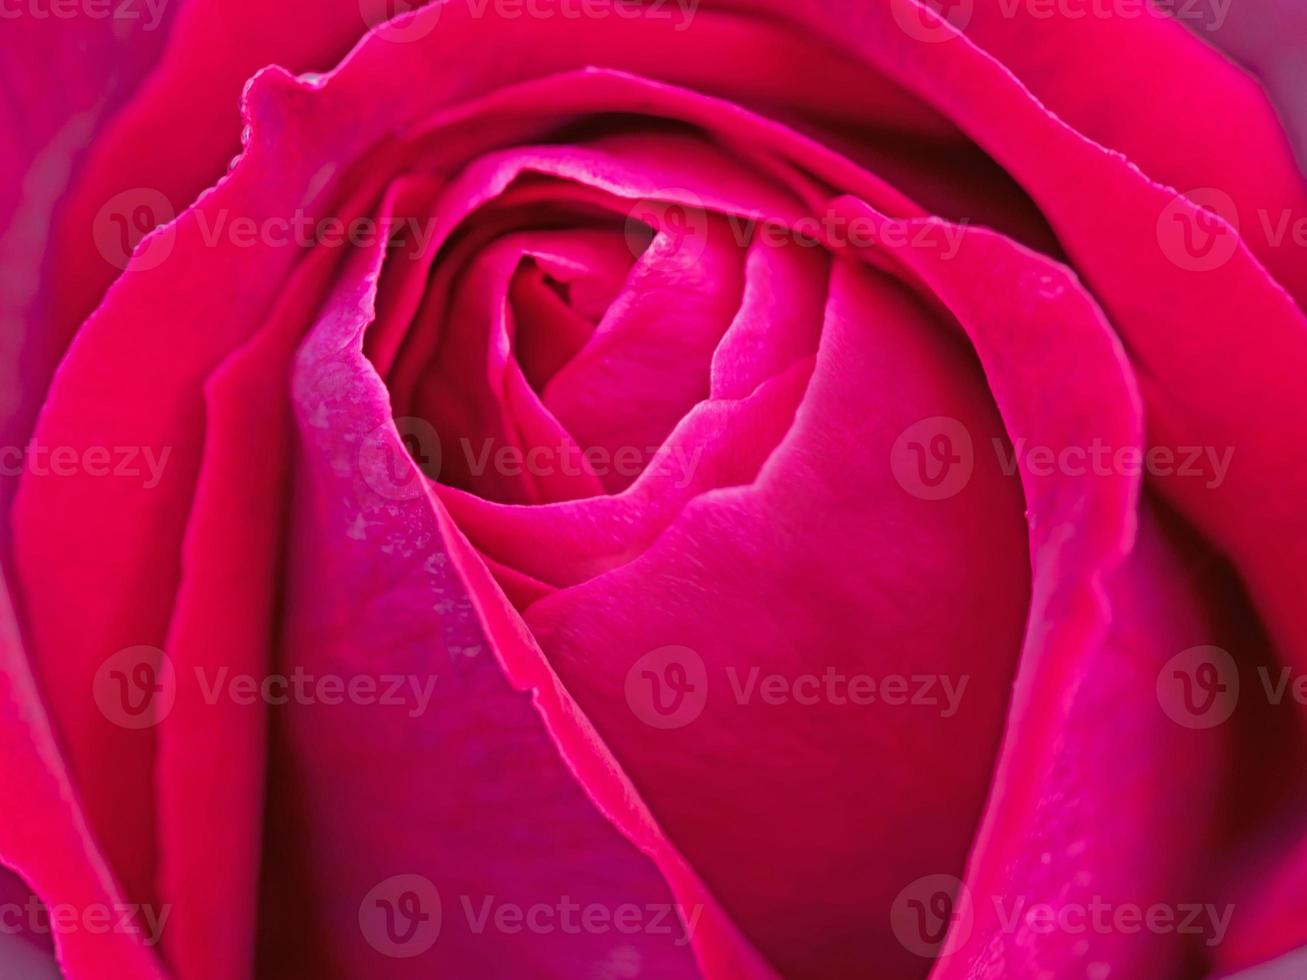 Red rose close-up photo